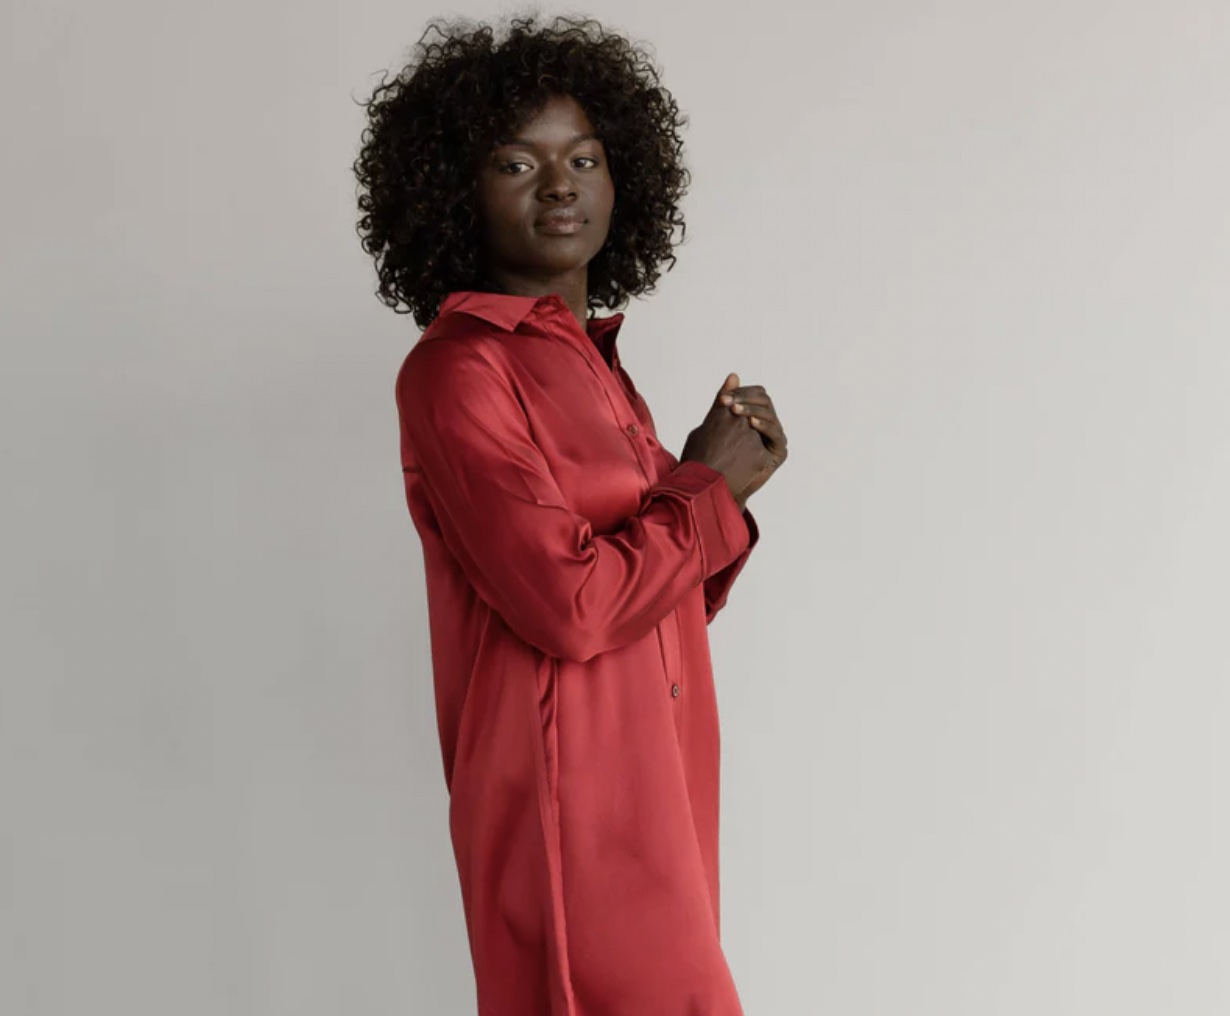 s Top-Rated Silk Pajamas for Your Best Night of Sleep Ever